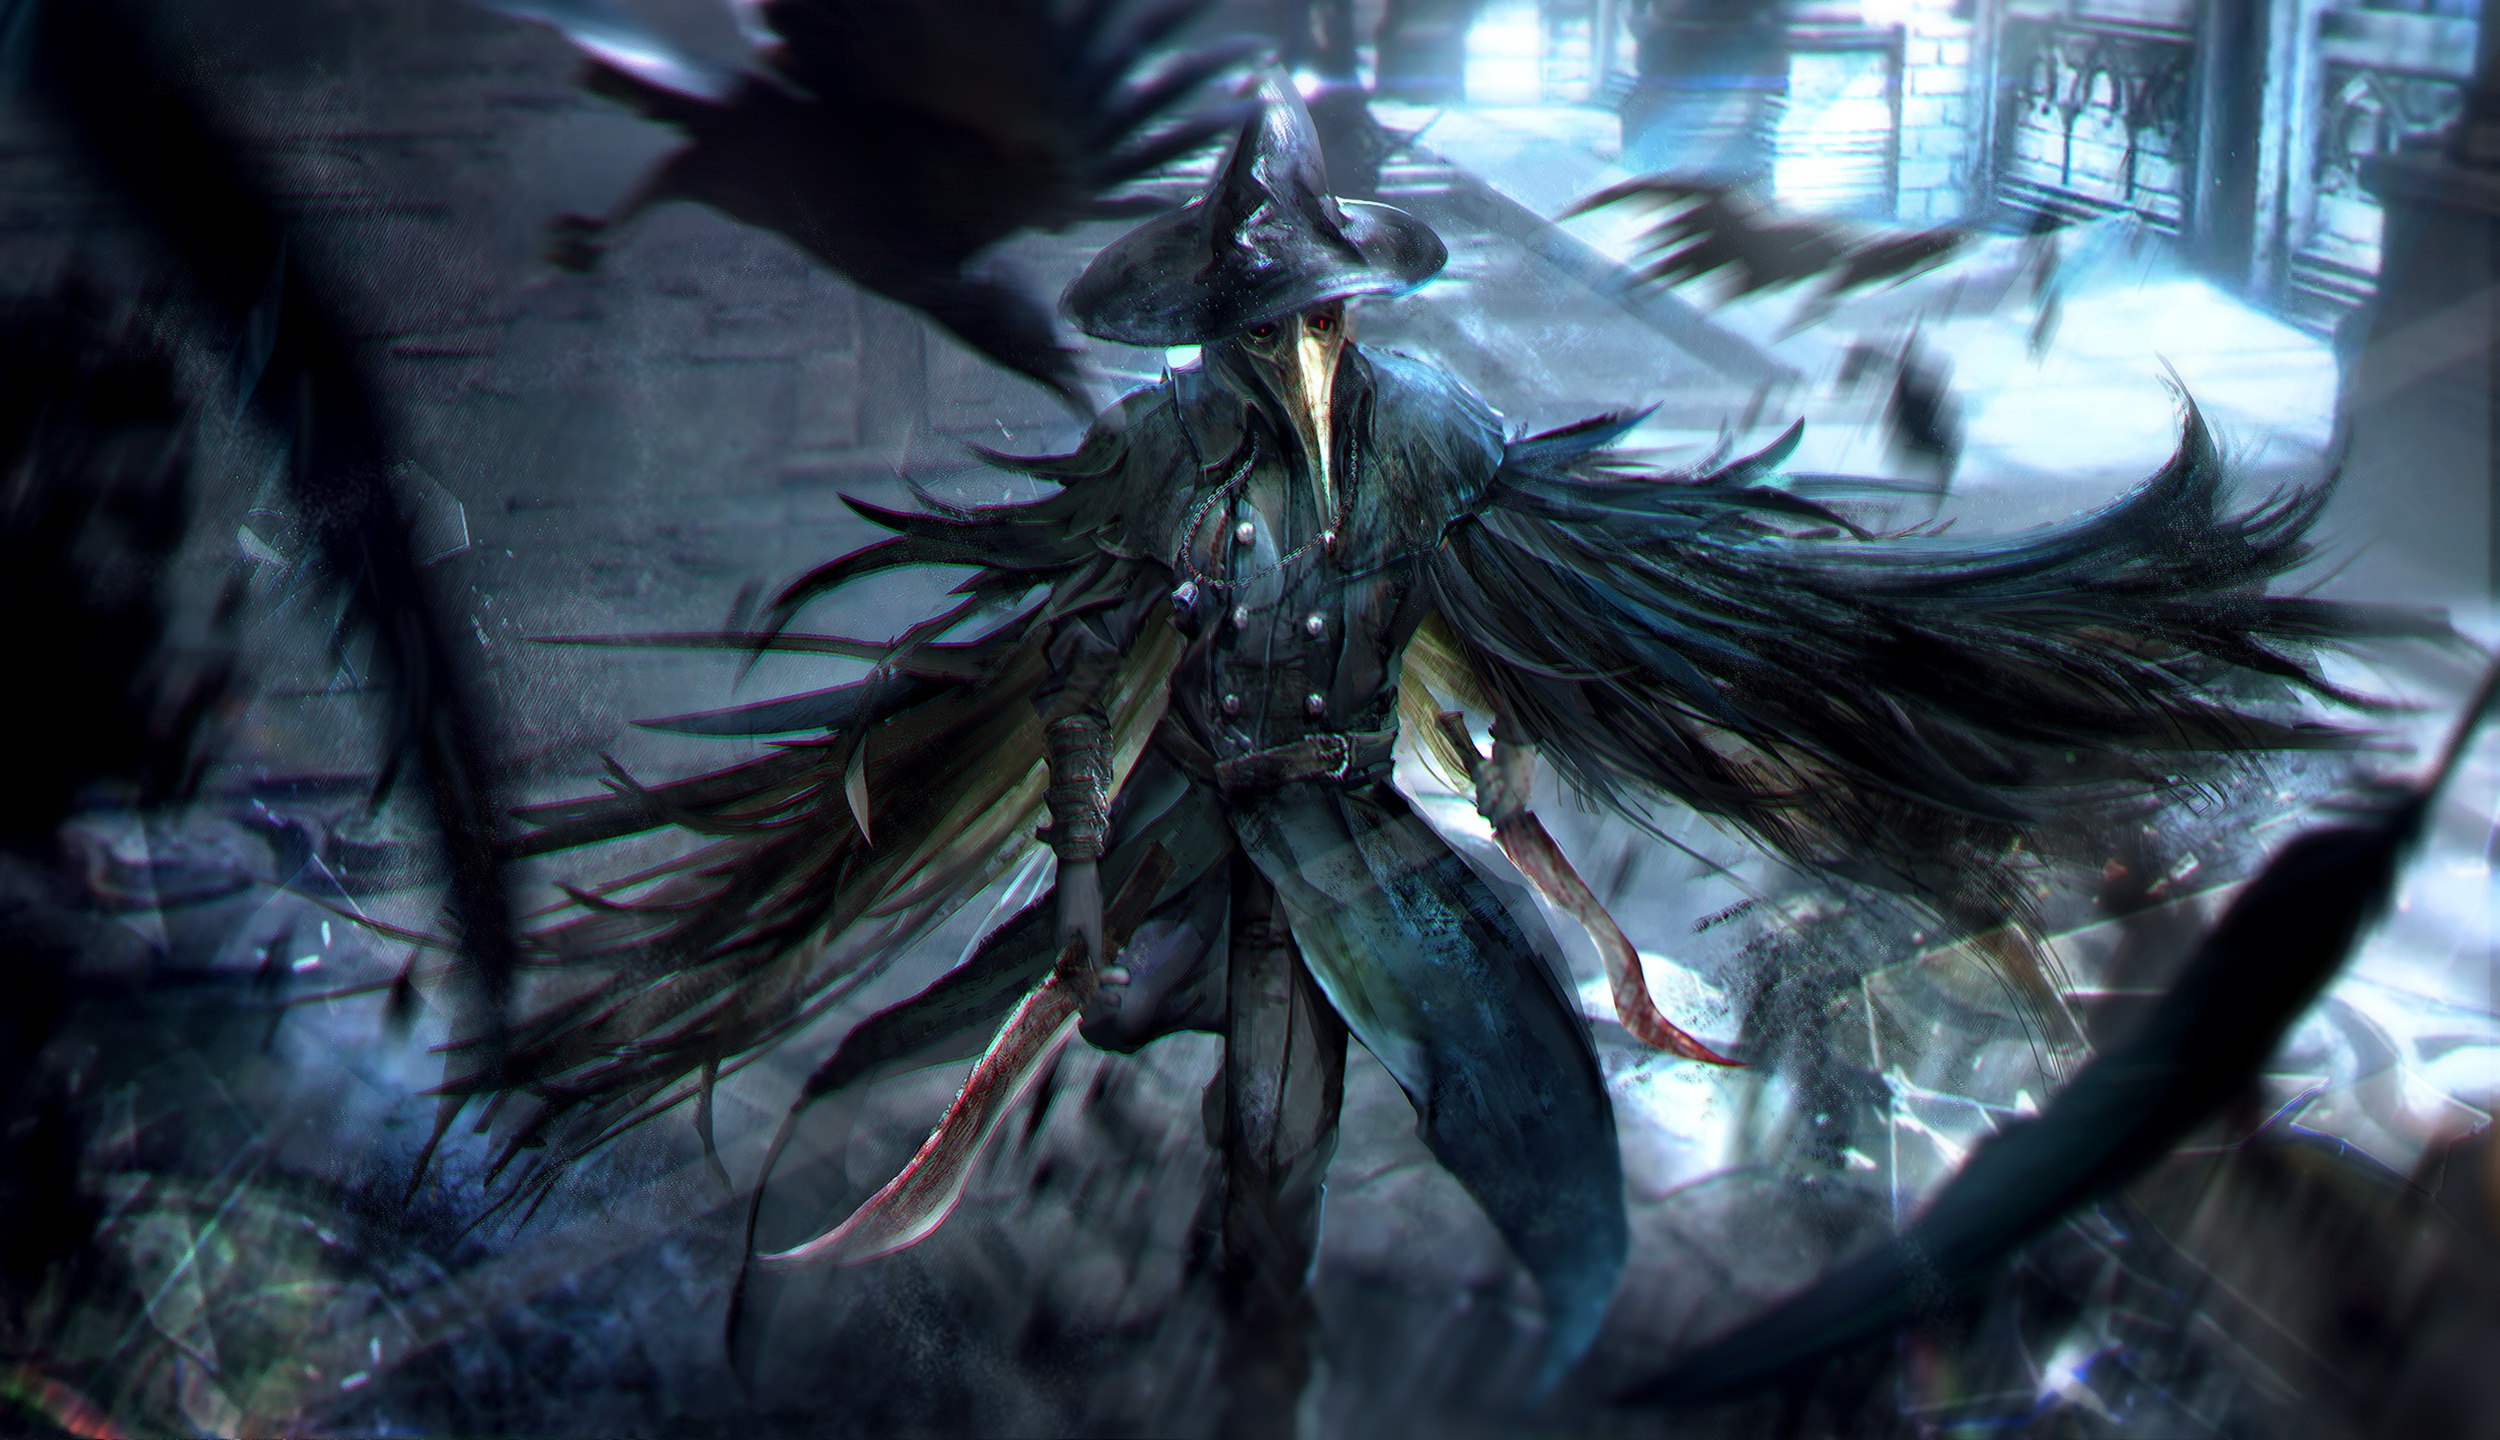 2500x1440 Free download Bloodborne Full HD Wallpaper and Background [] for your Desktop, Mobile \u0026 Tablet | Explore 98+ Plague Doctor Wallpapers | Plague Doctor Wallpaper, Plague Doctor Wallpapers, Plague Fortnite Wallpapers